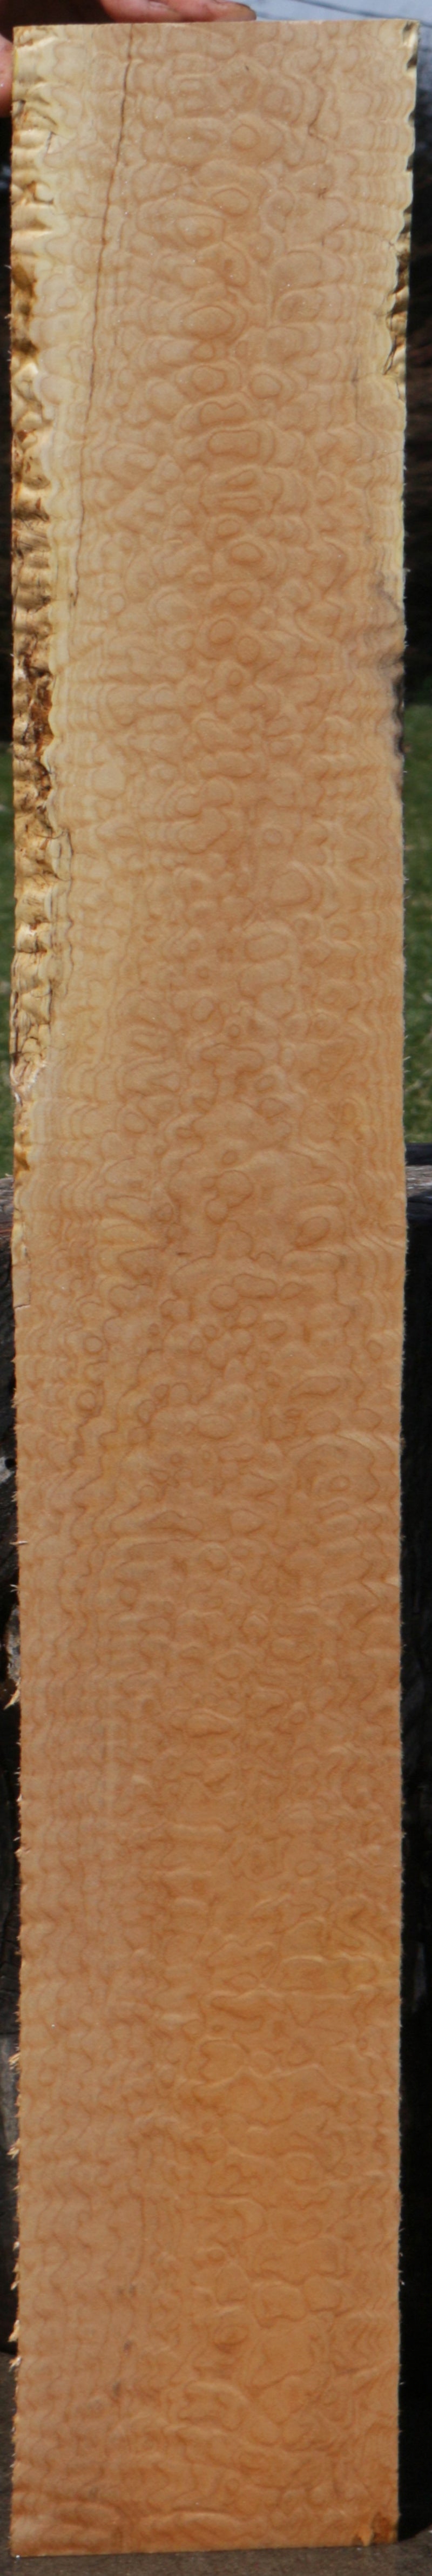 AAA Quilted Western Big Leaf Maple Lumber